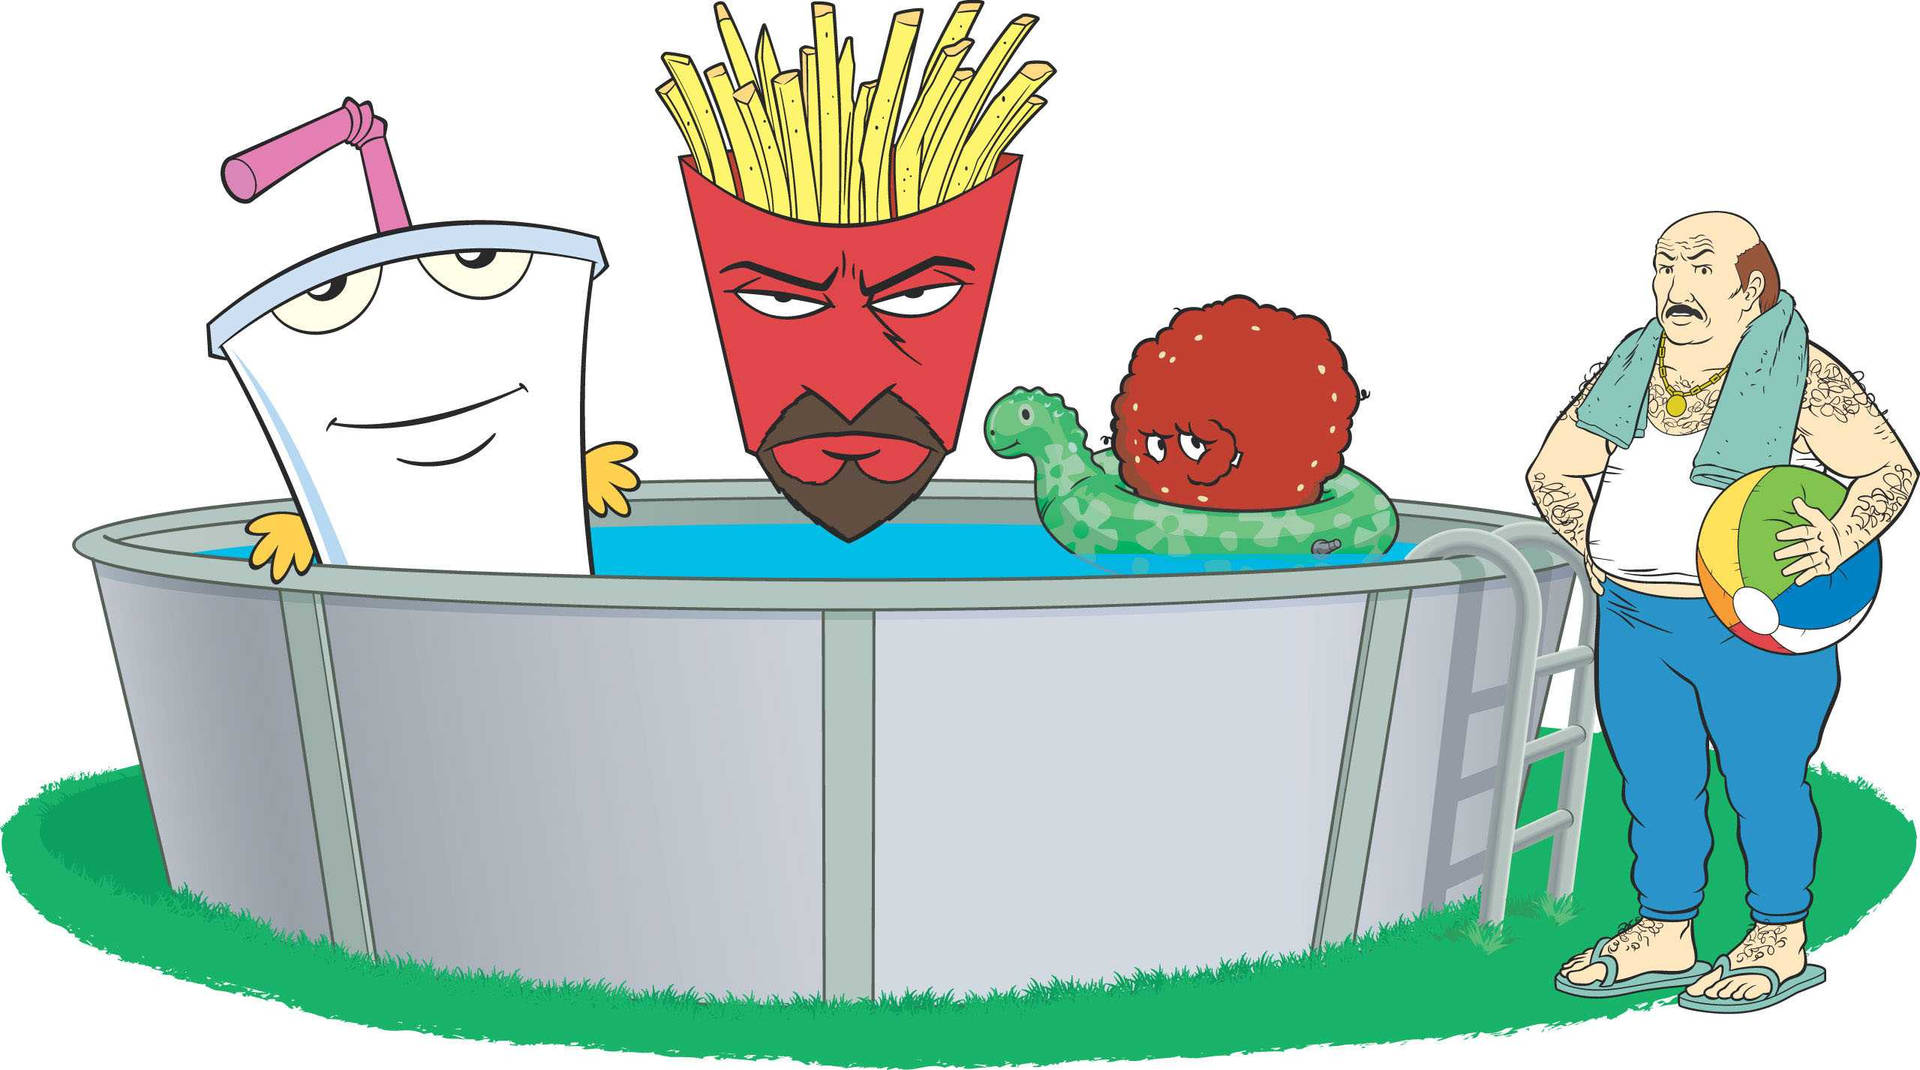 Caption: Aqua Teen Hunger Force Having Fun by the Pool Side with Carl Wallpaper